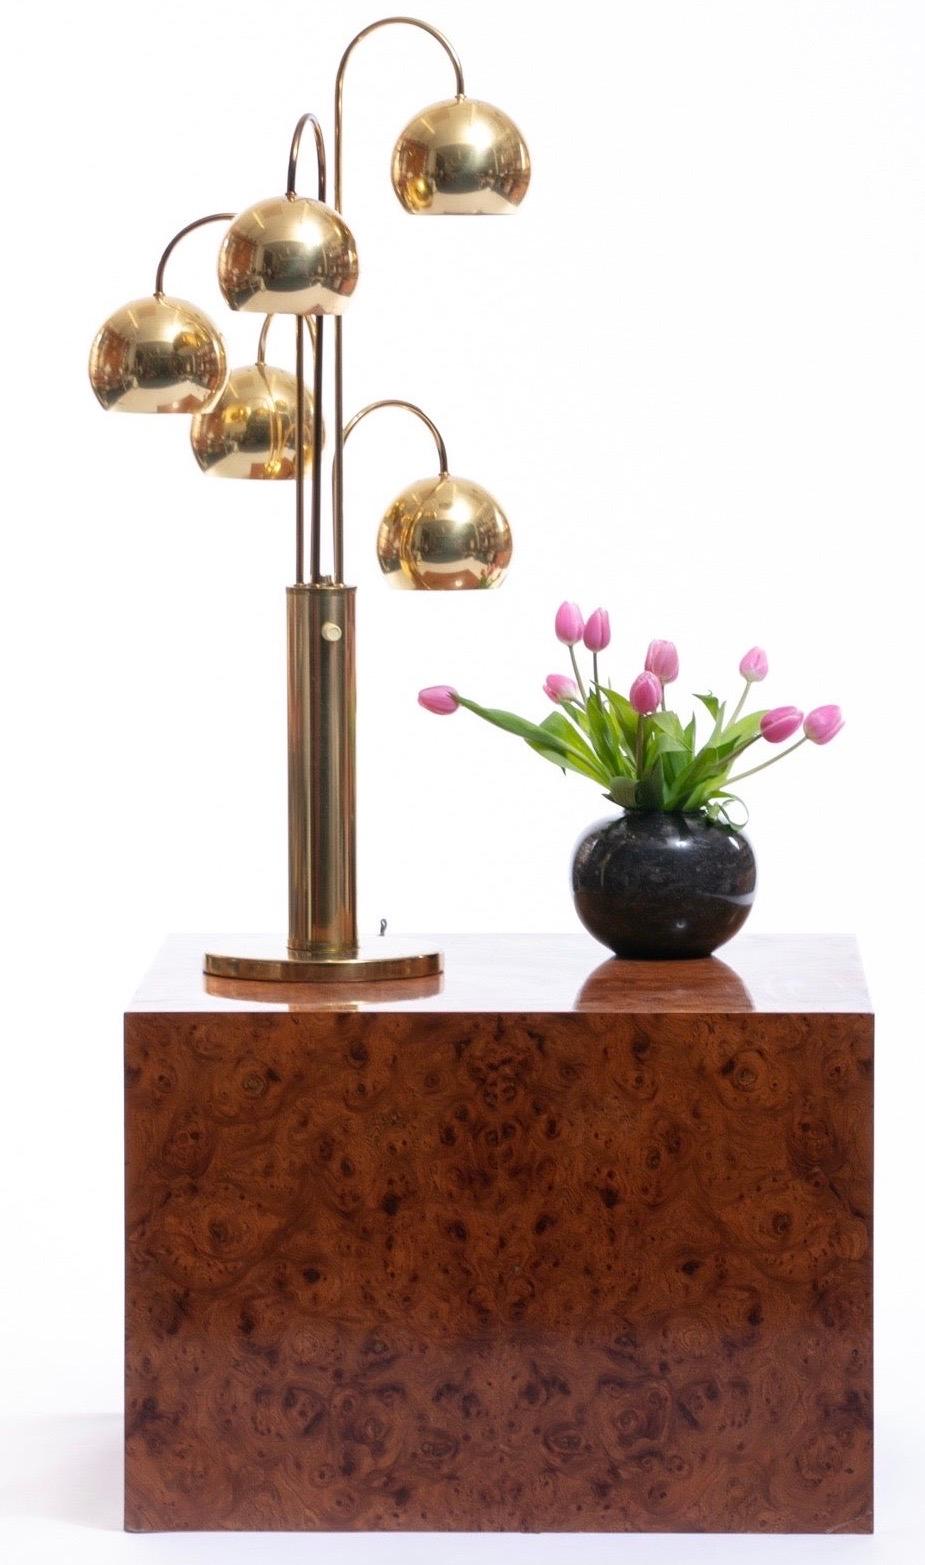 Tall brass midcentury eyeball table lamp by Robert Sonneman. Iconic 1970s Sonneman waterfall design. Three-way switch allows for selection of number of bulbs in use - 2, 3 or all 5 bulbs at once. Arms are somewhat adjustable so can vary in height